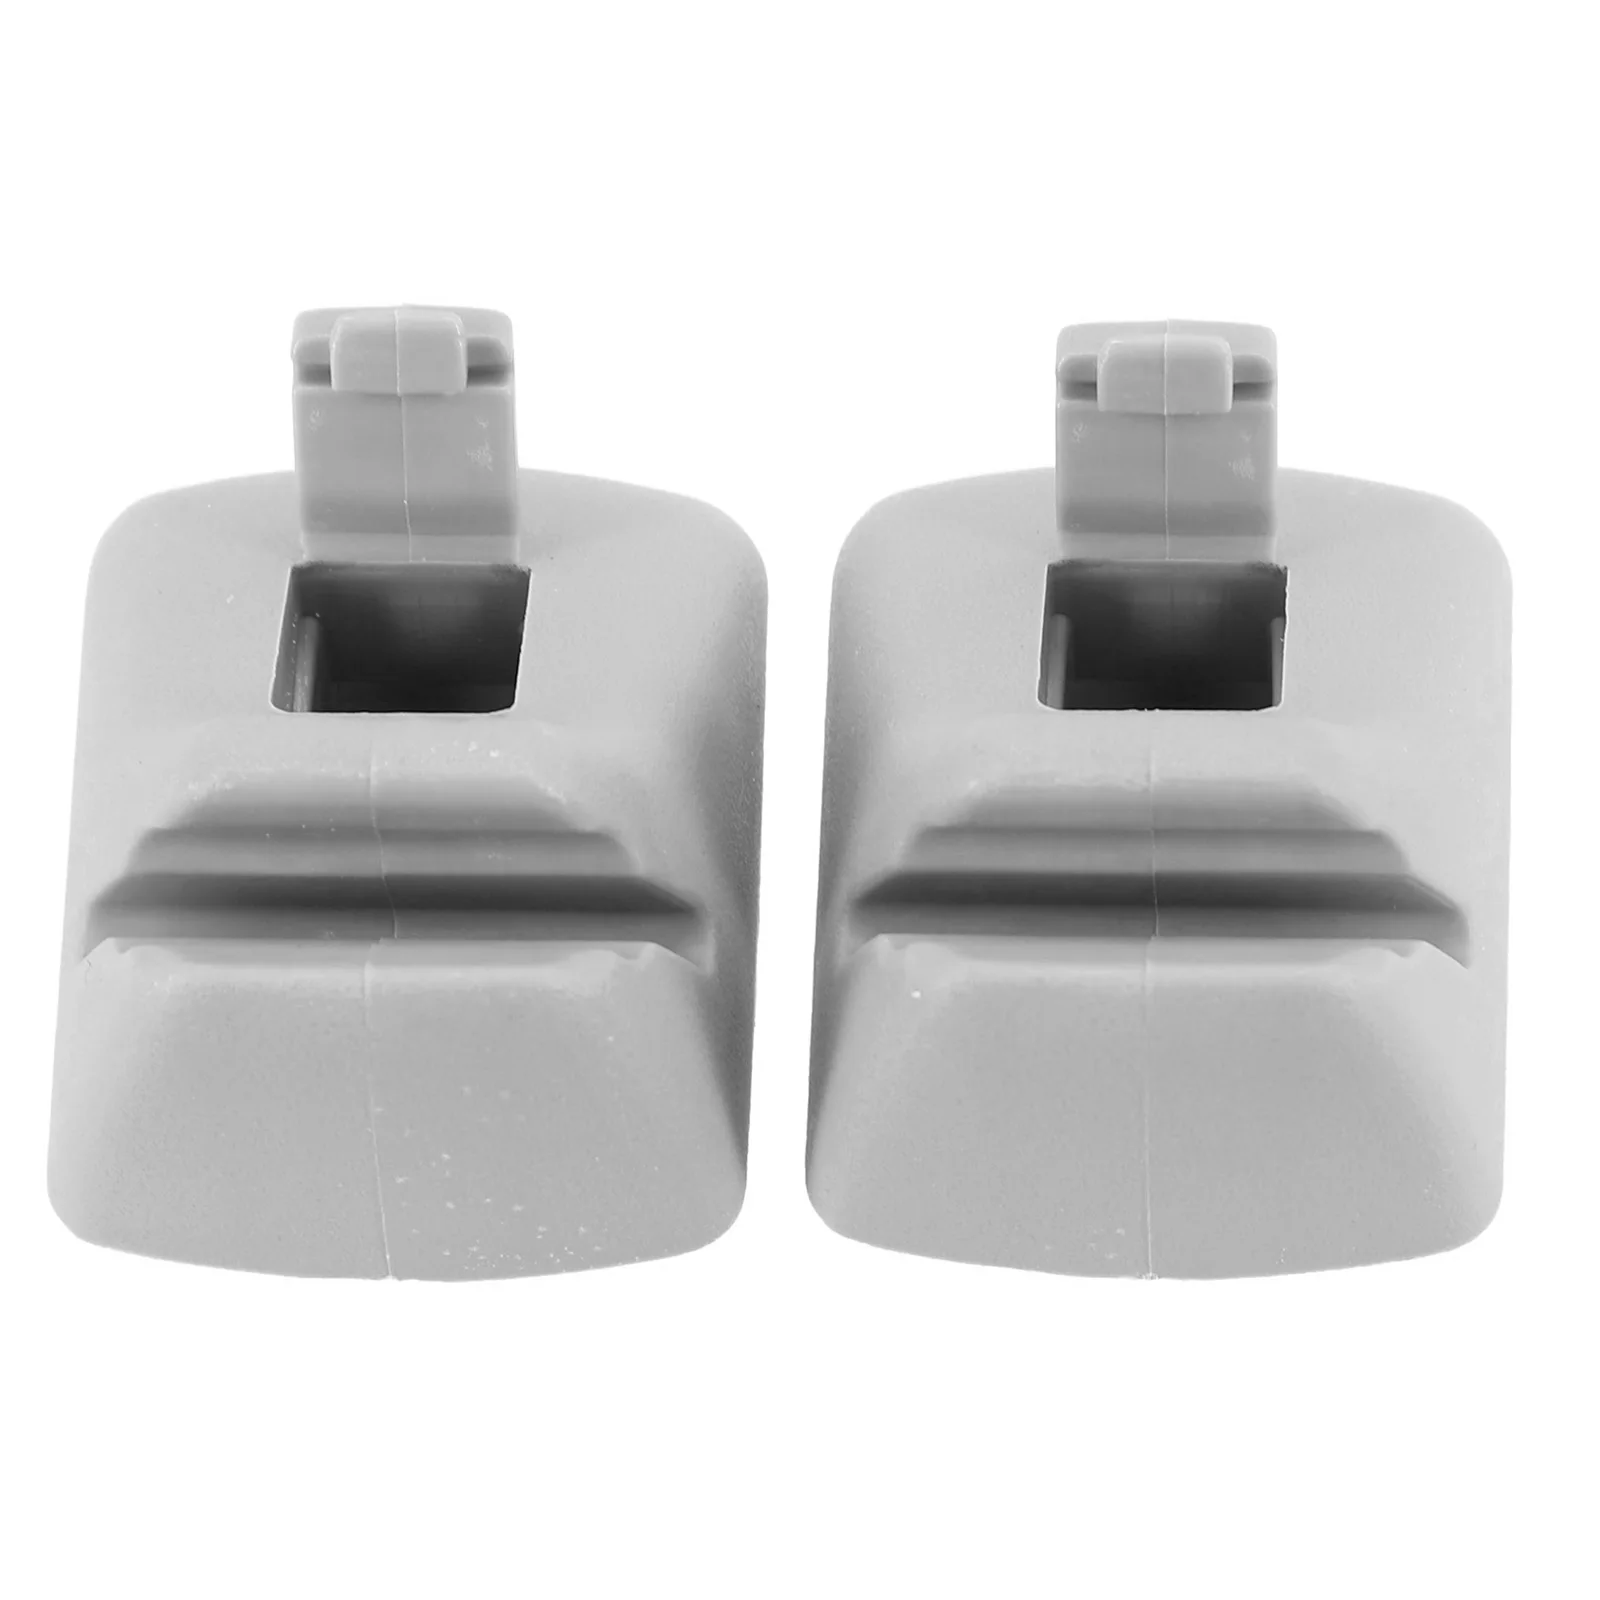 

1Pair Grey Sun Visor Retainer Clips Fits For Ford For Focus 2000-2004 Automobiles Interior Accessories YS4Z-5404132-AAA